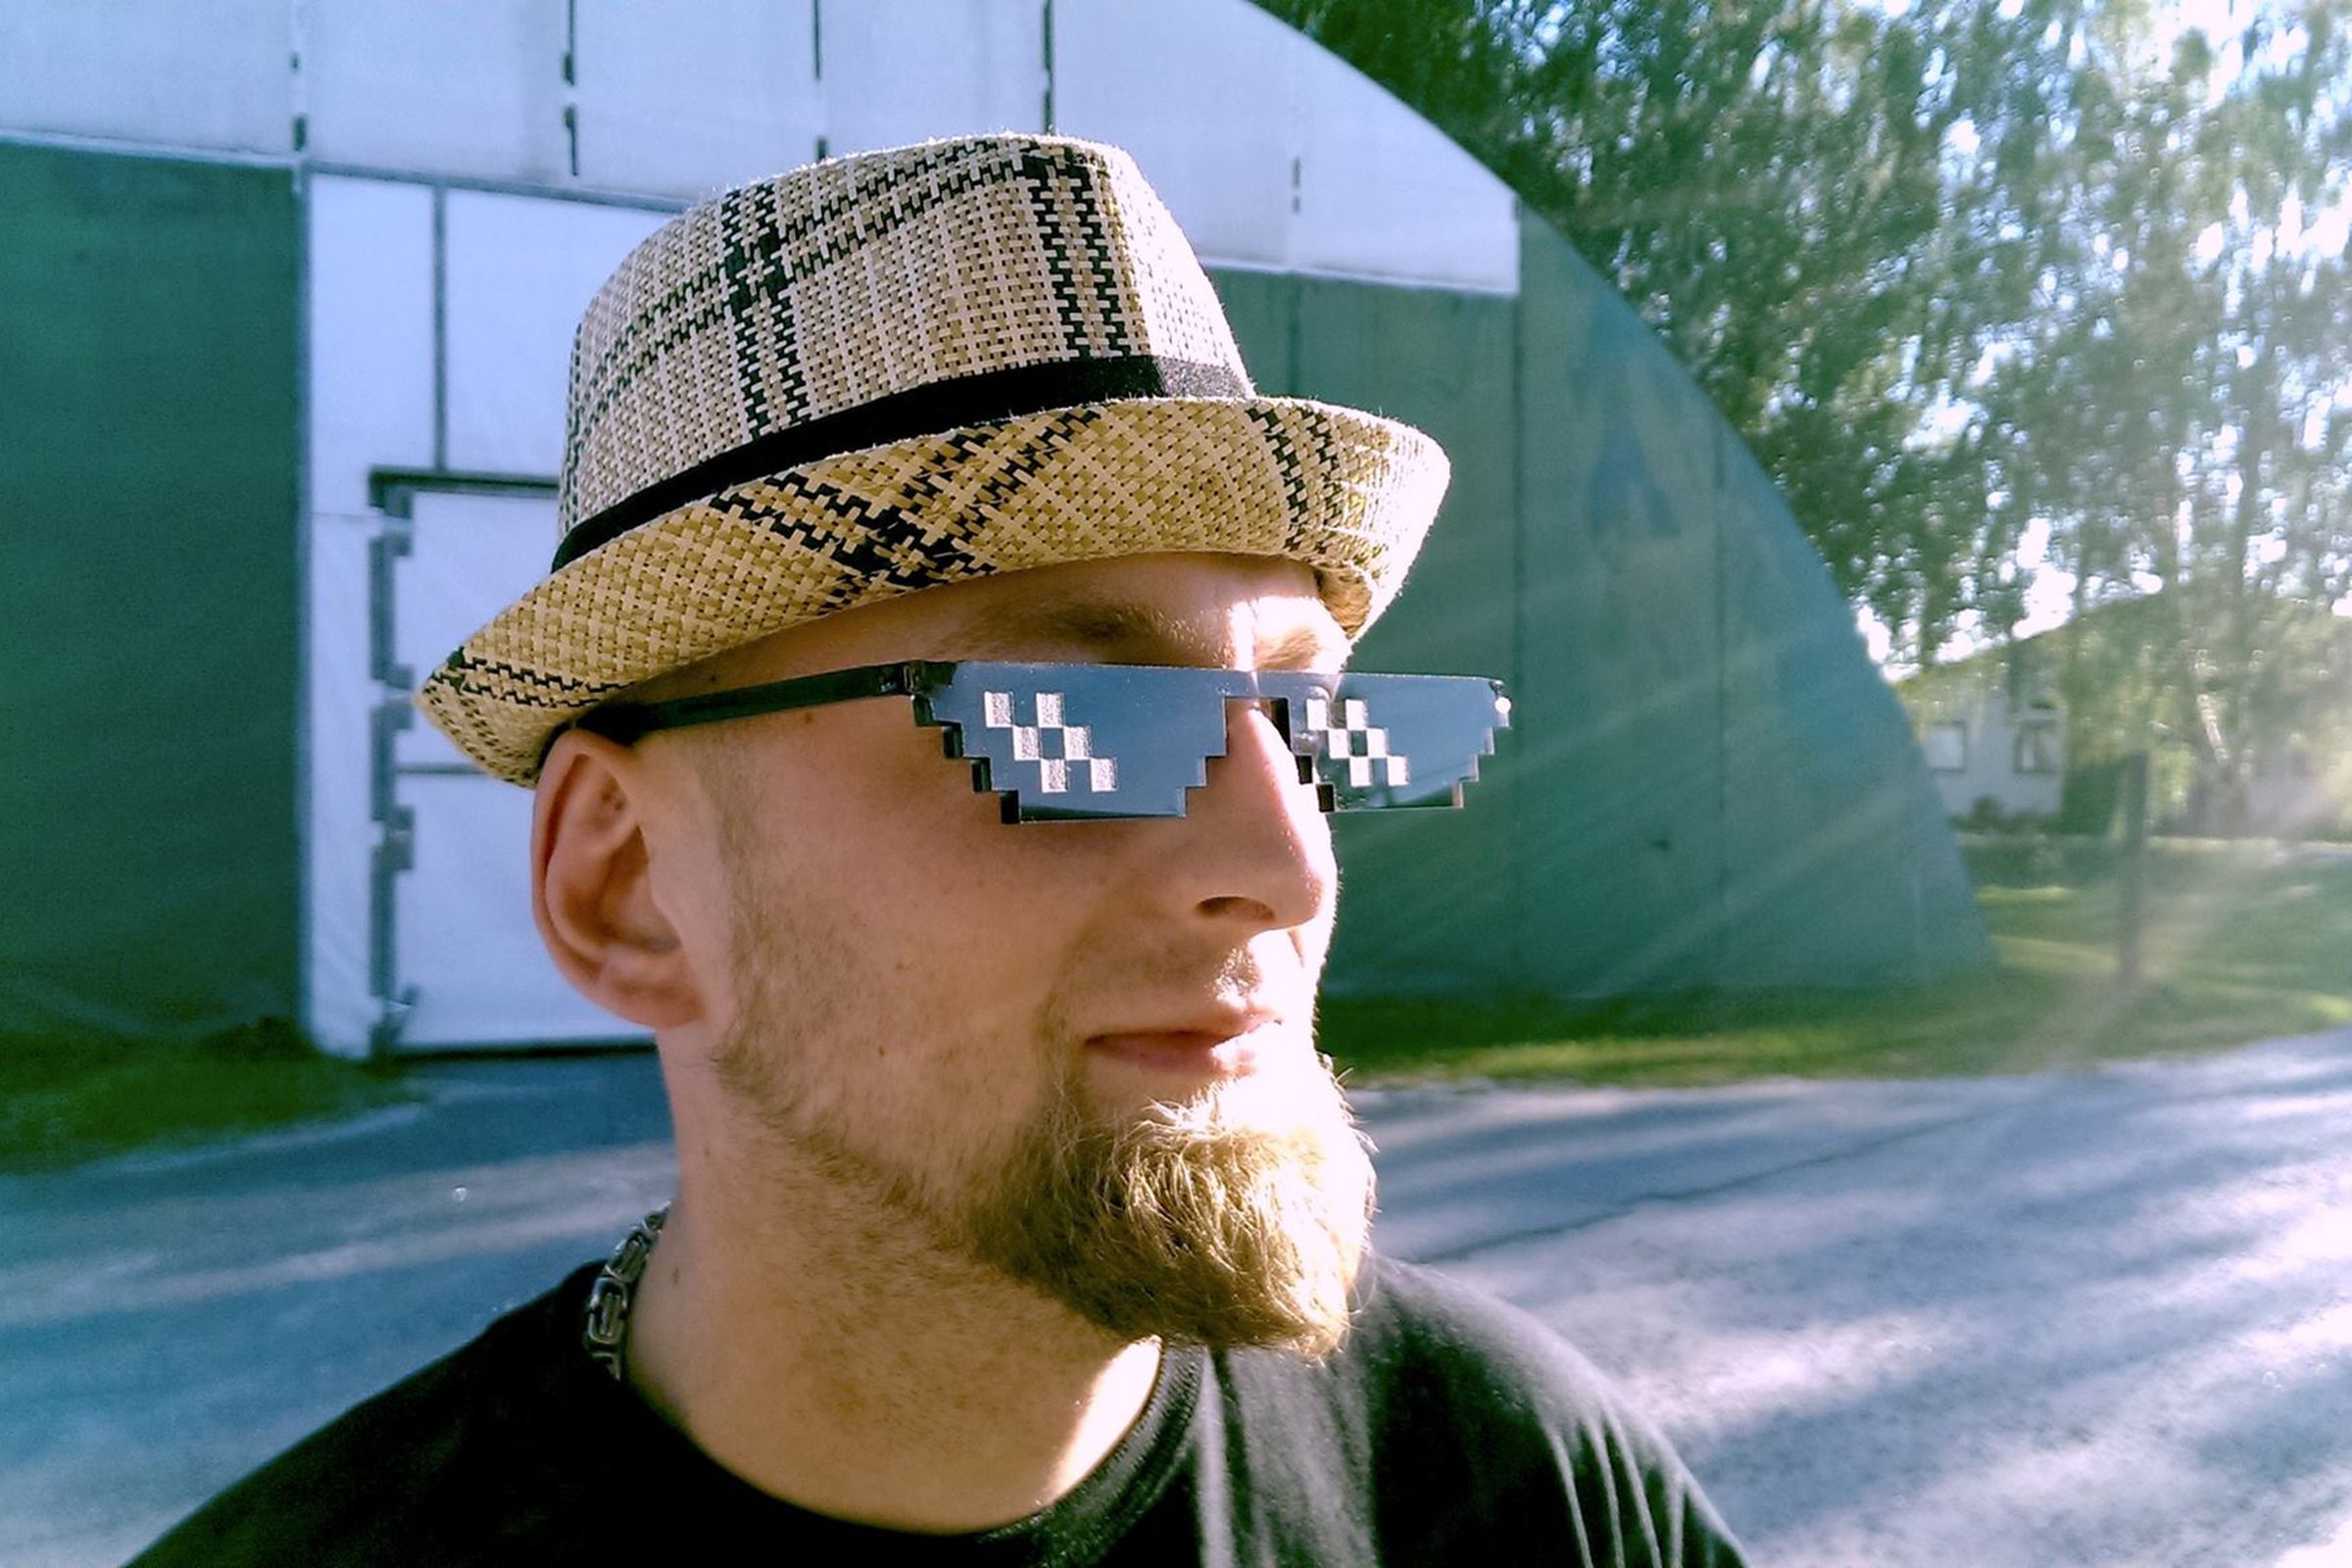 A man models the new 'Deal with It' sunglasses